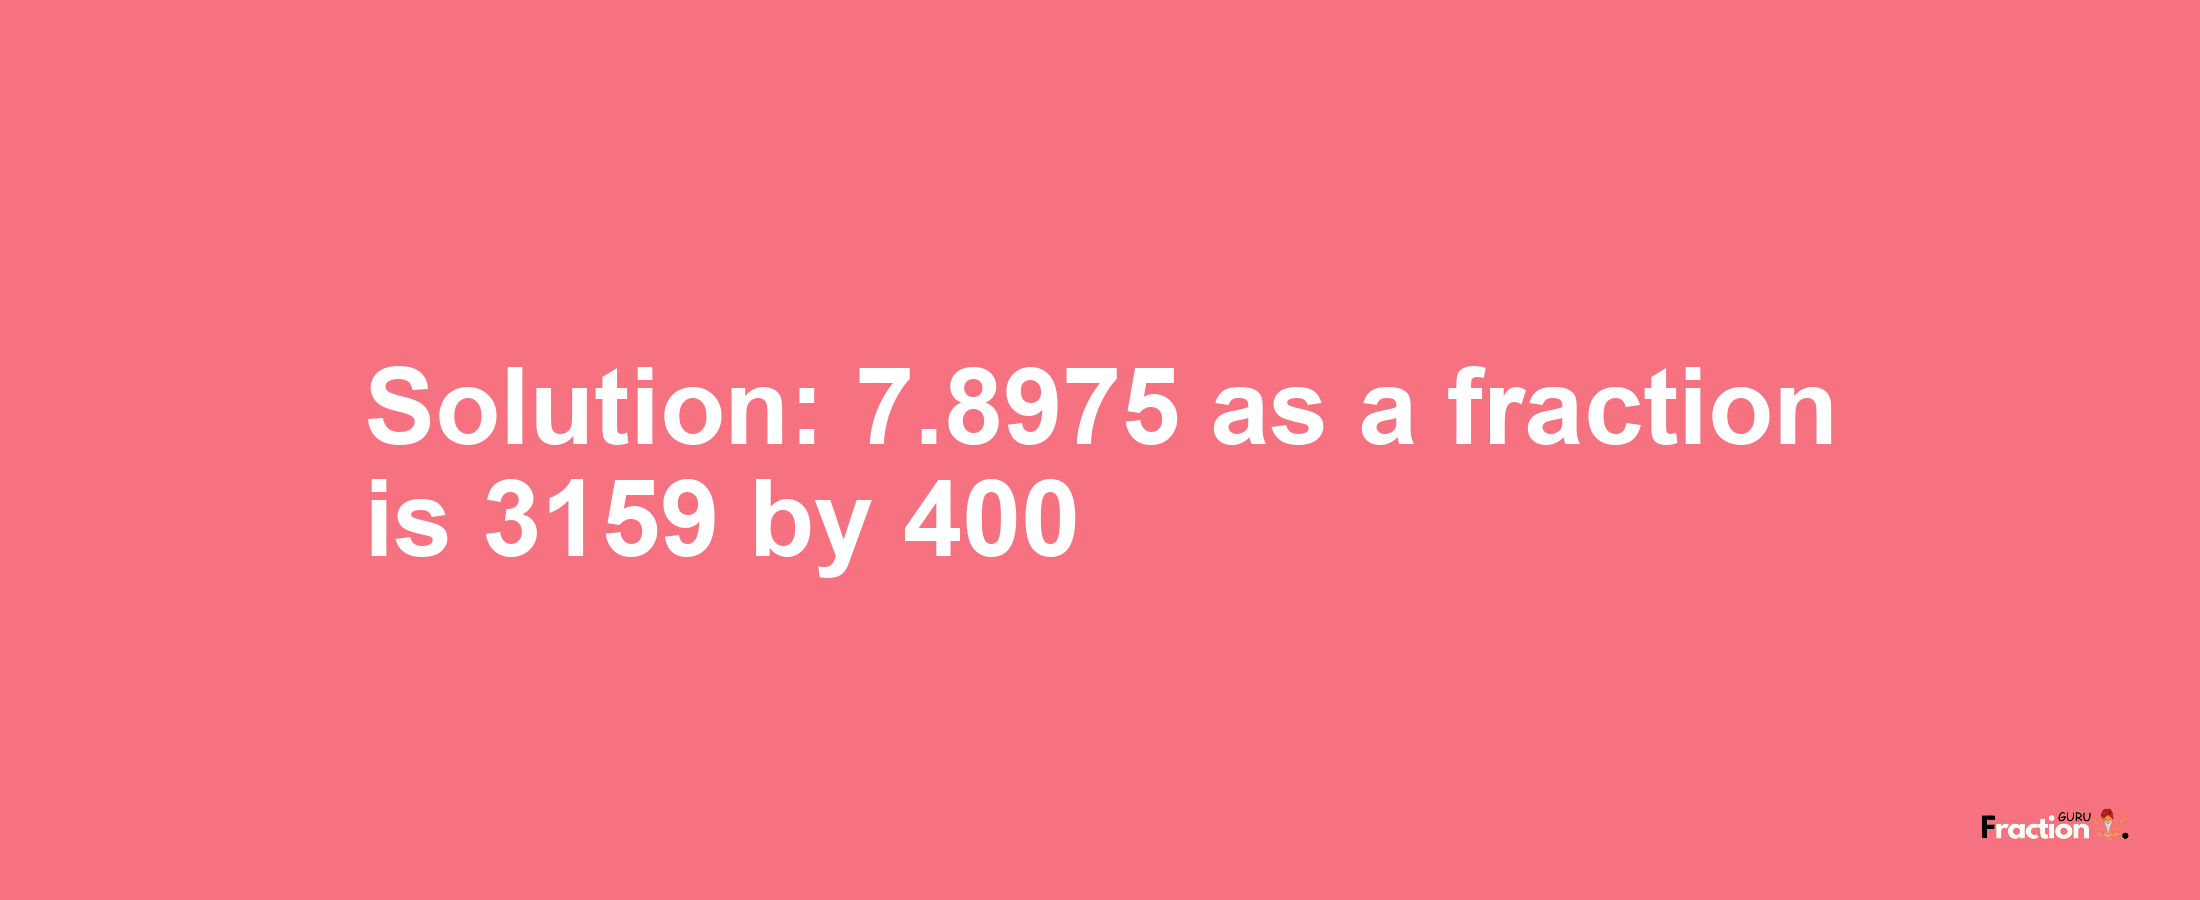 Solution:7.8975 as a fraction is 3159/400